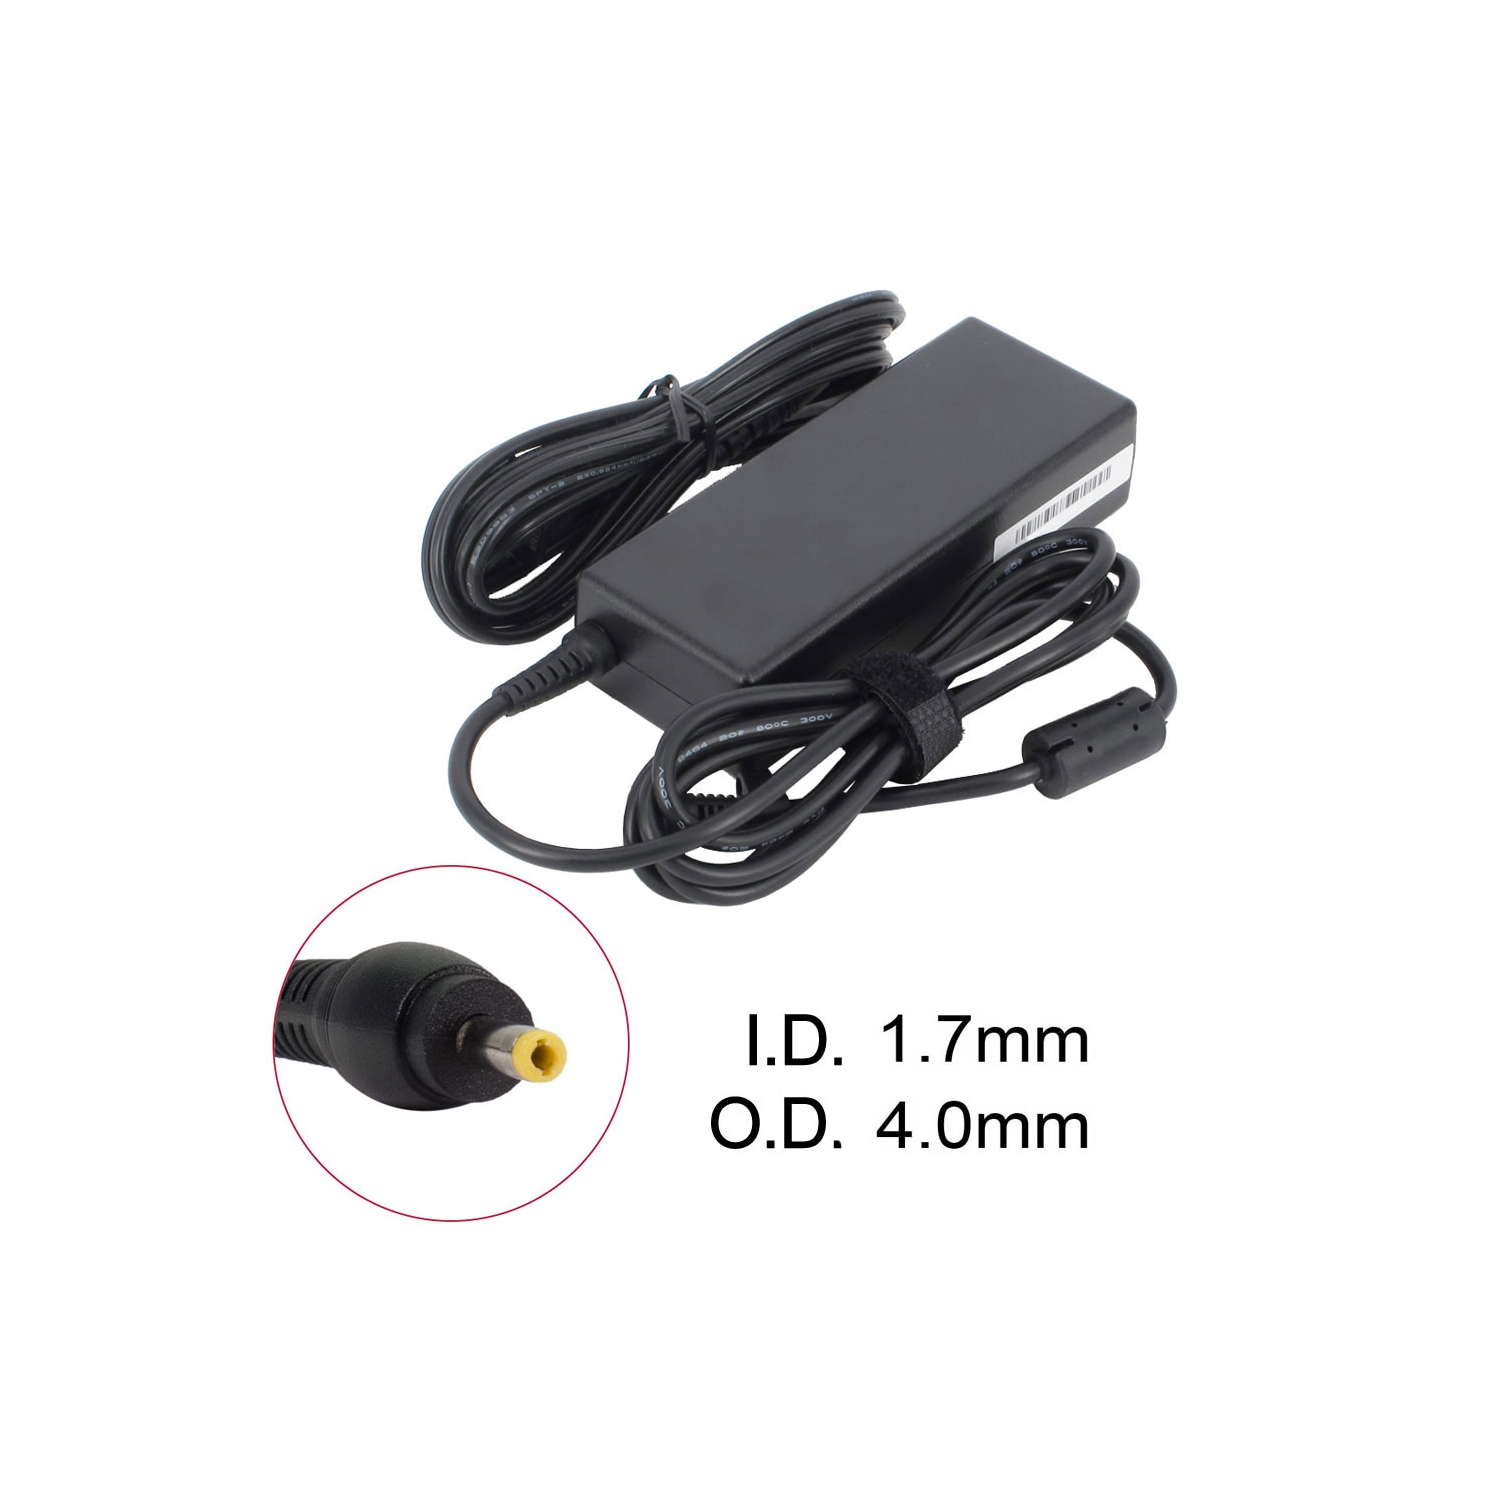 BATTDEPOT NEW Lenovo N22 Winbook 65W/90W 20V 3.25A - 4.5A max Laptop AC Adapter Charger